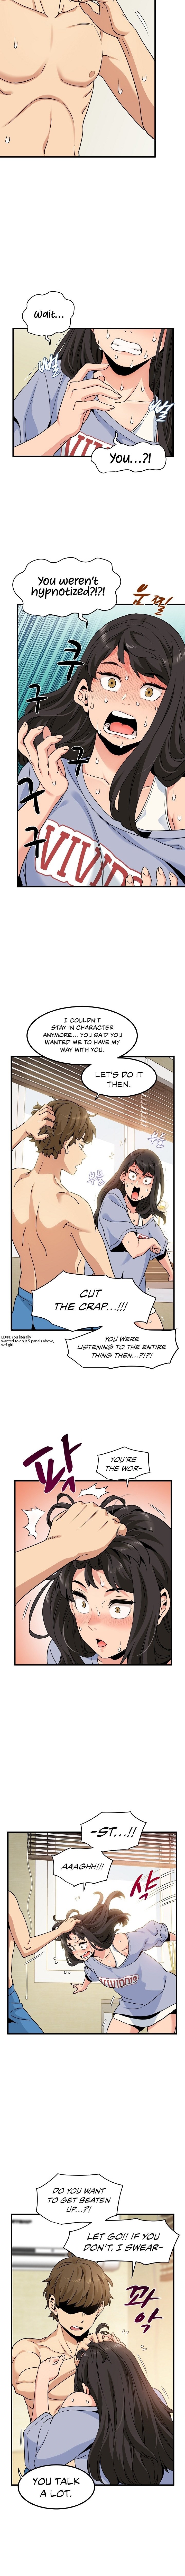 a-turning-point-chap-4-10